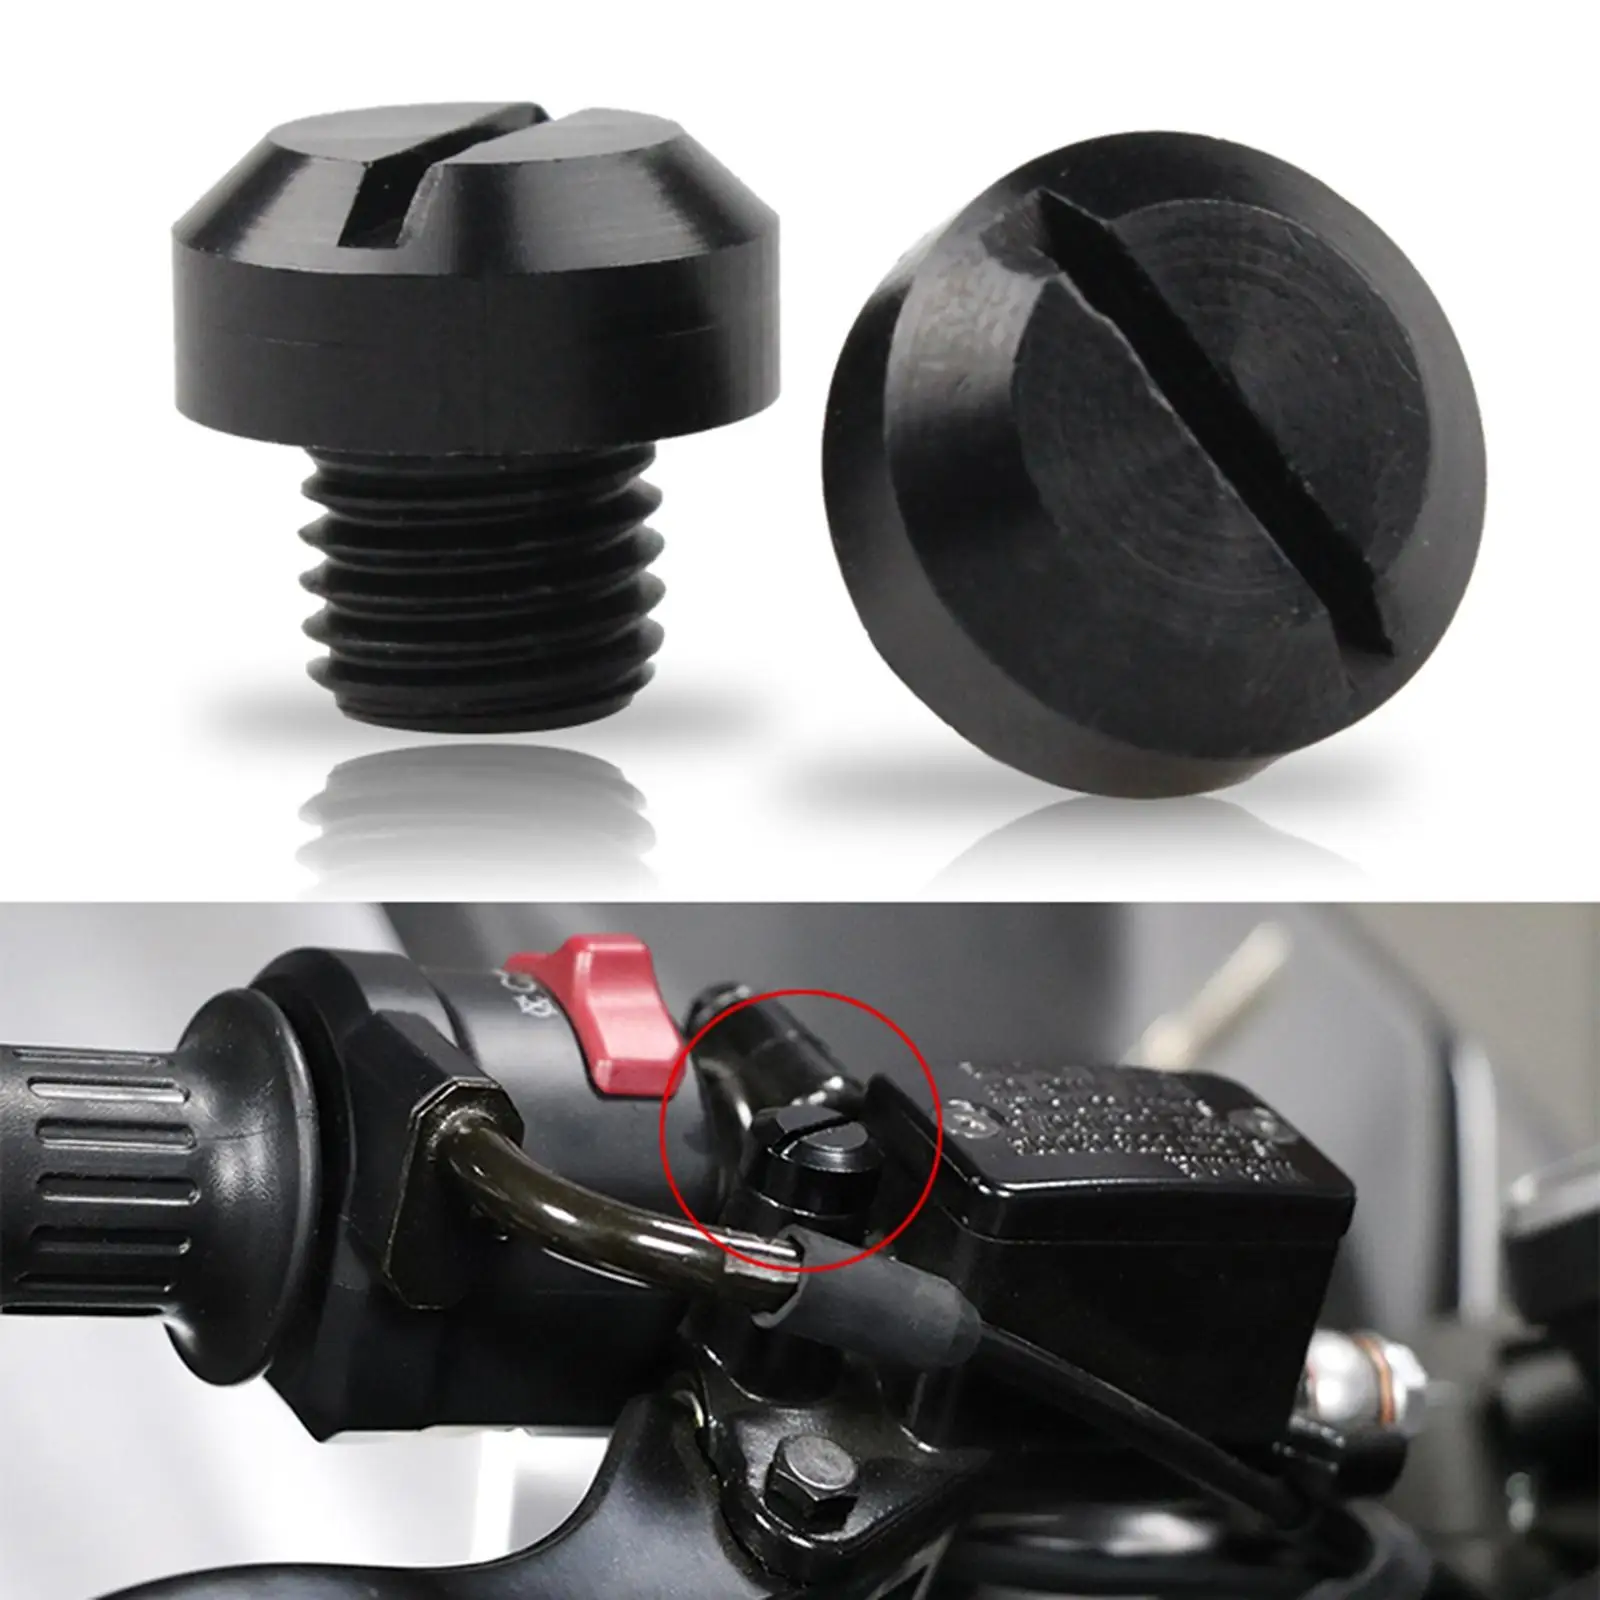 2X Rearview Mirror Thread Hole Plugs Bolts Covers Caps Black Positive